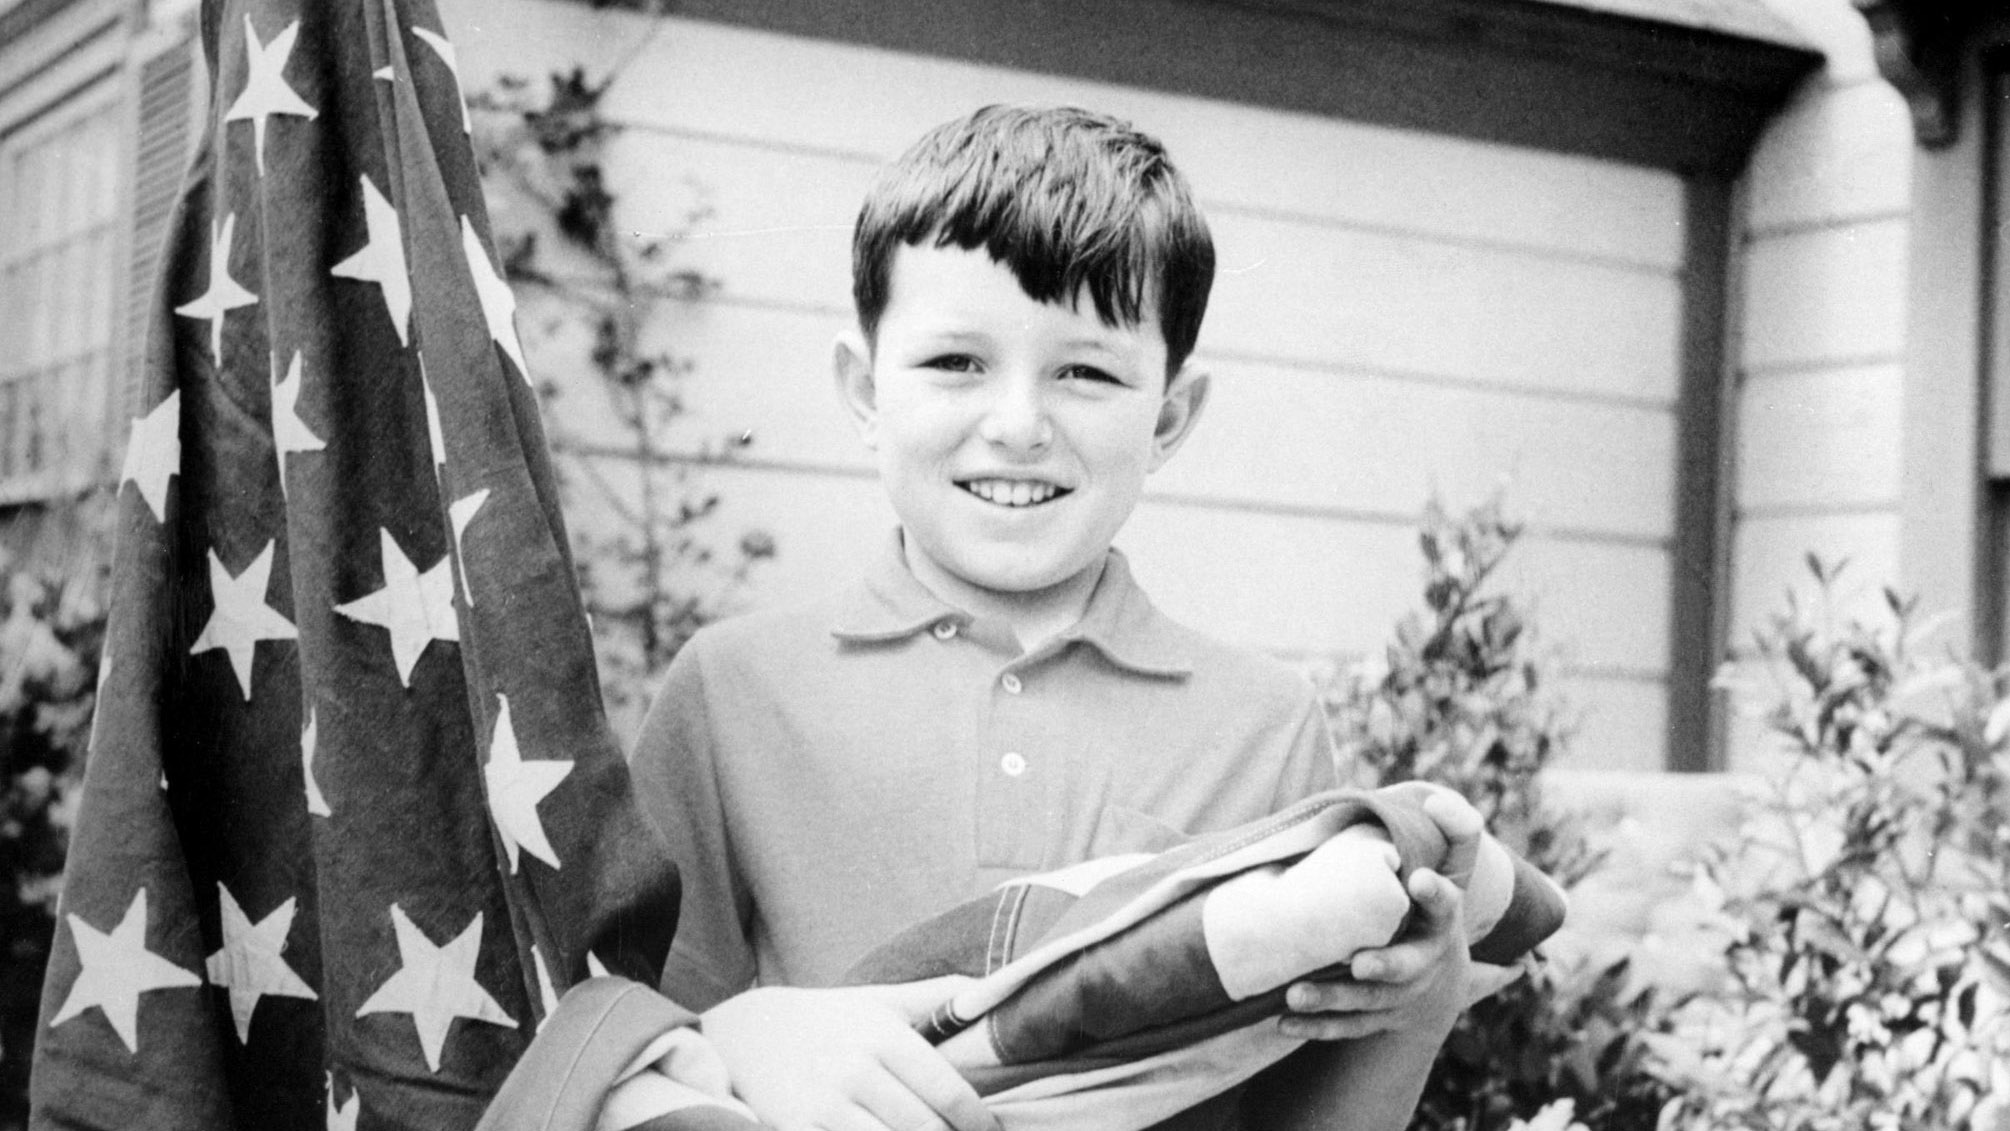 LEAVE IT TO BEAVER, Jerry Mathers, holding a flag